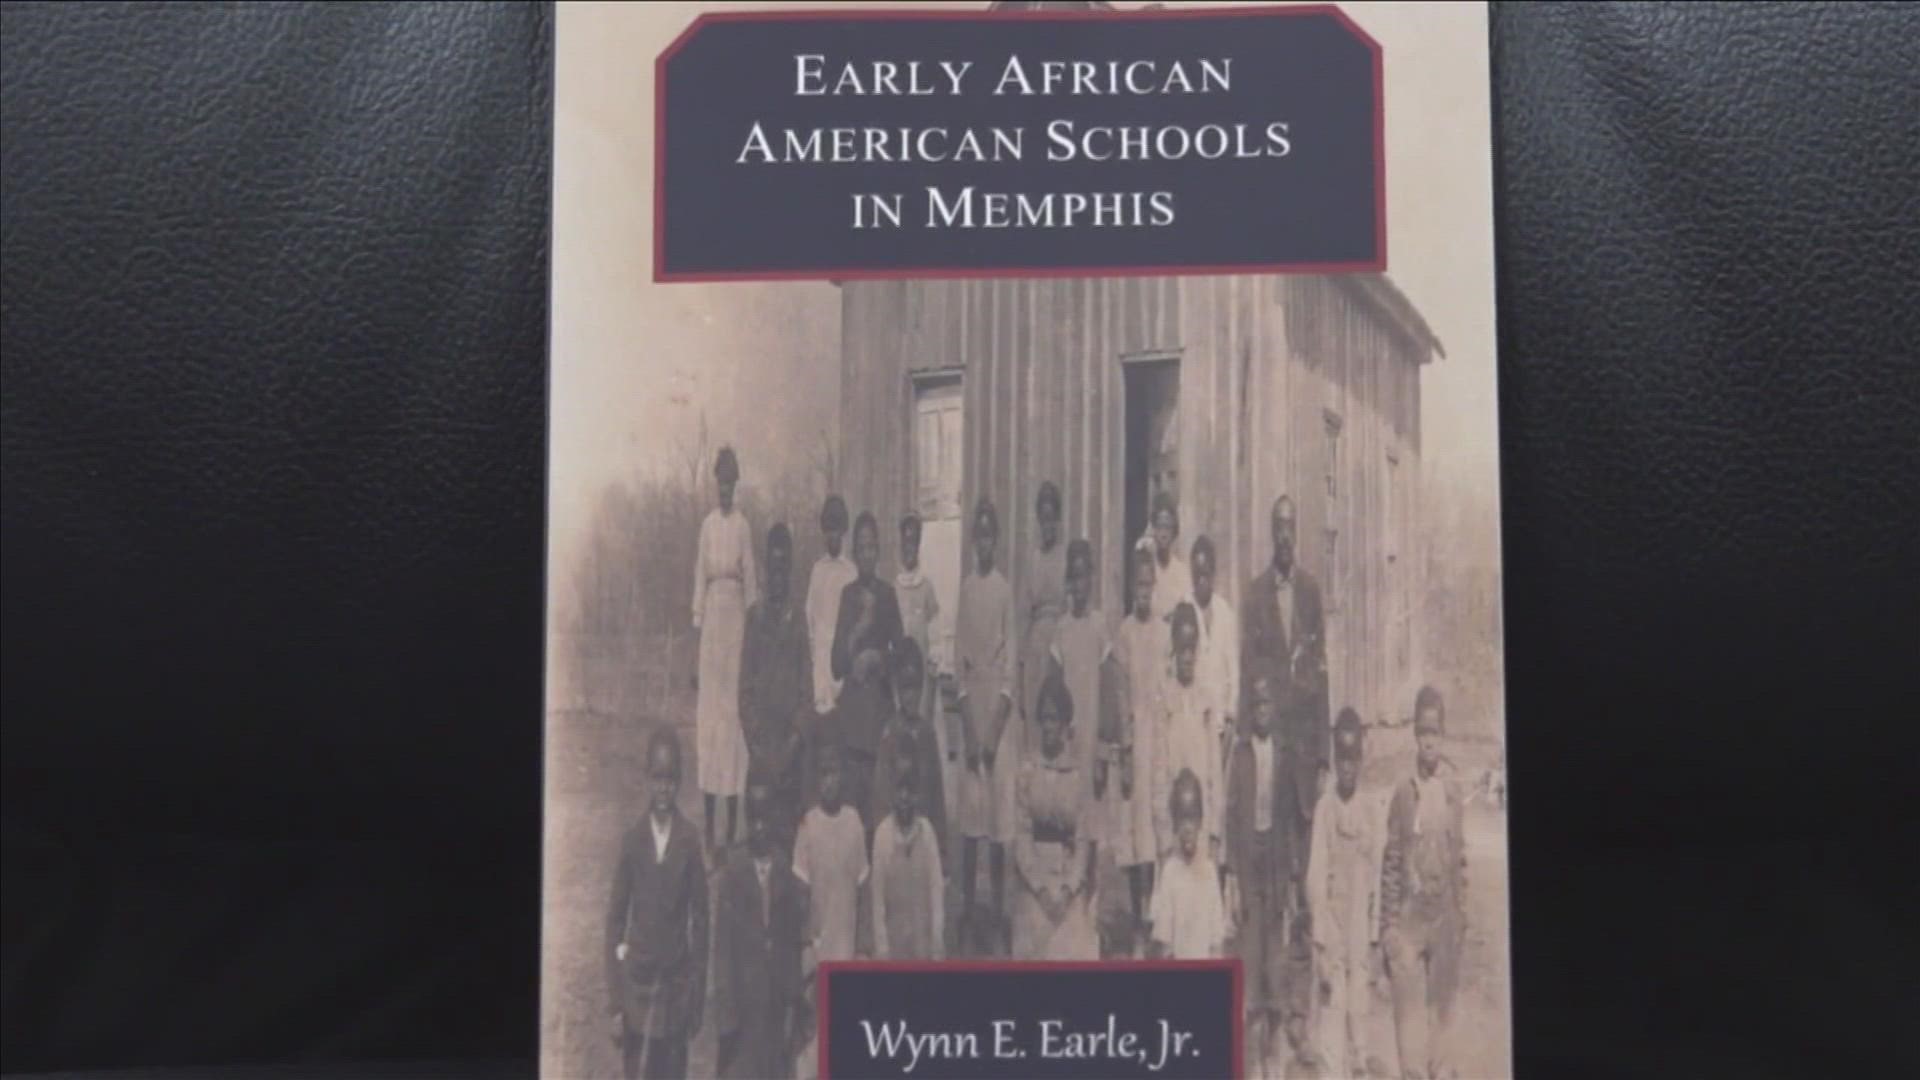 ABC24’s Brittani Moncrease caught up with Kingsbury Elementary School principal Wynn Earle Junior about his book ‘Early African American Schools in Memphis.’